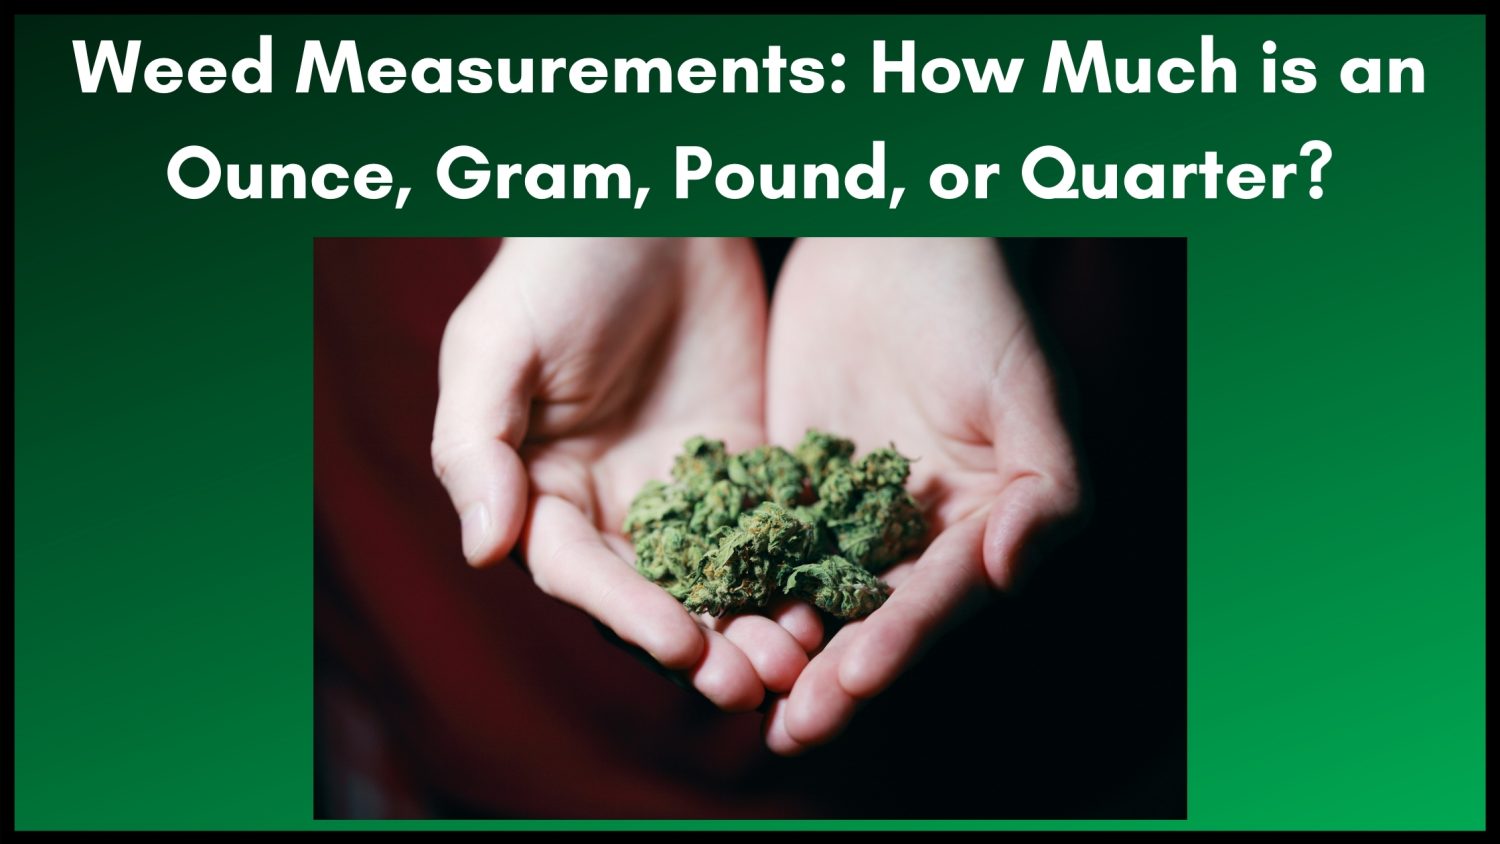 https://www.thecannaschool.ca/wp-content/uploads/2021/05/Weed-Measurements-How-Much-is-an-Ounce-Gram-Pound-Quarter.jpg